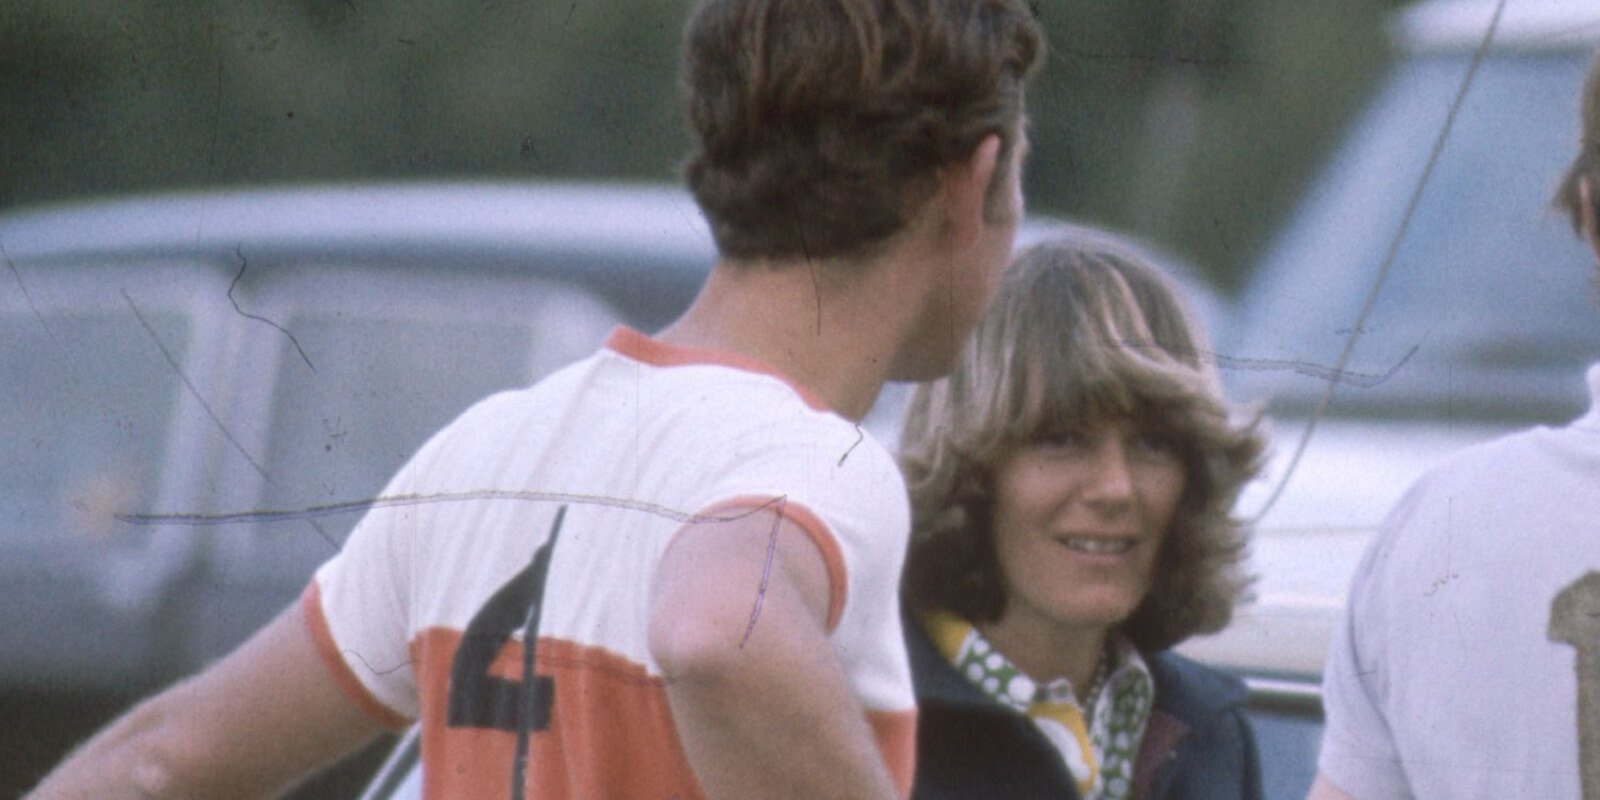 Then-Camilla Shand and Prince Charles at a polo match in 1972.